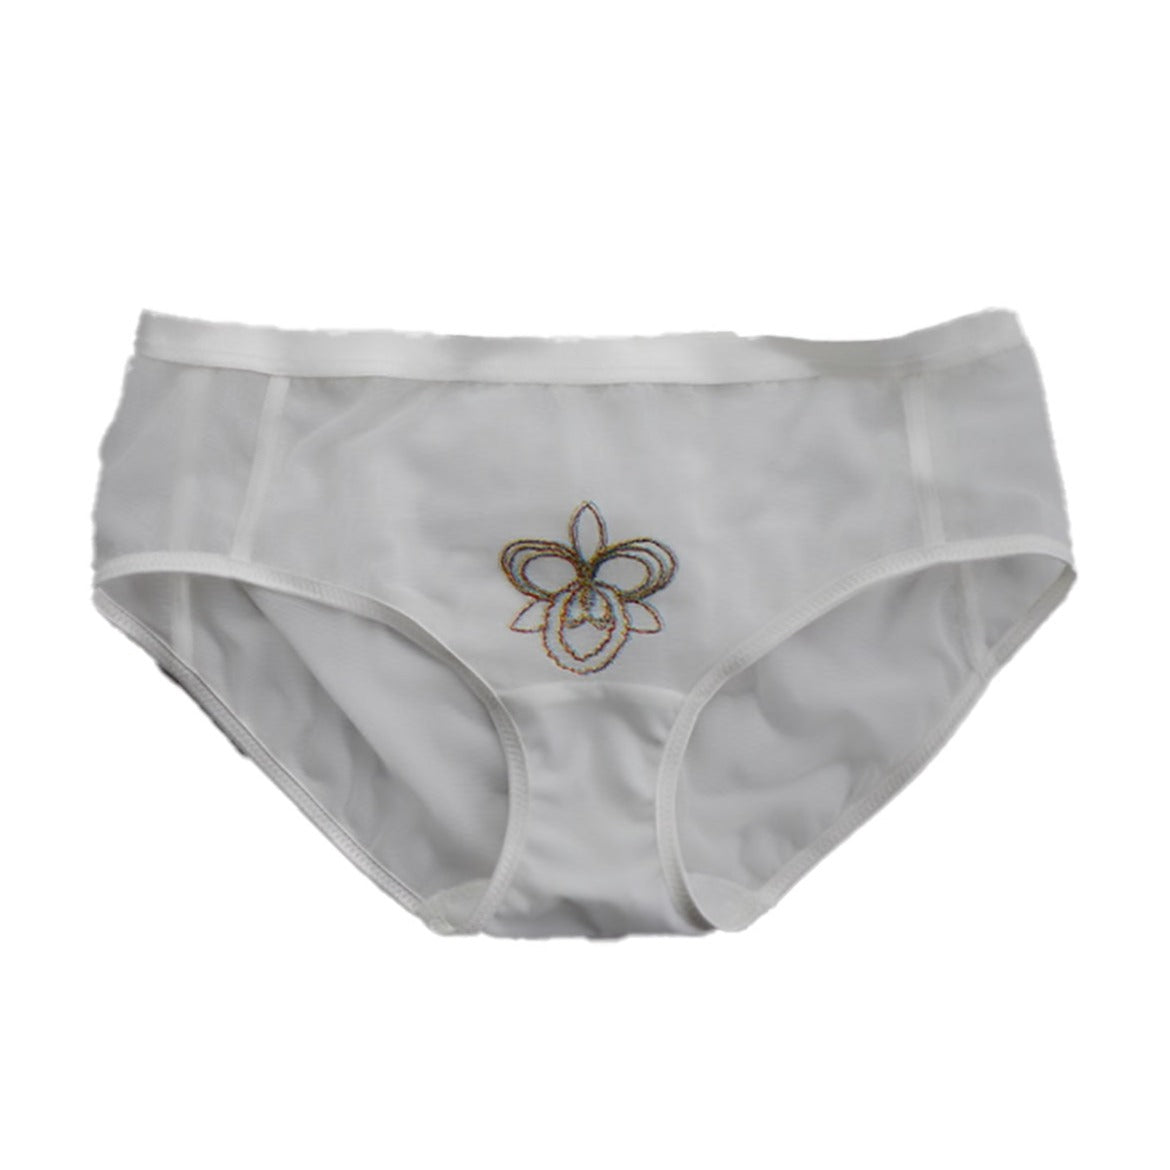 STANDARD PANTY EMBROIDERY POWER NET / WHITE Orchid – FOR YOUR EYES